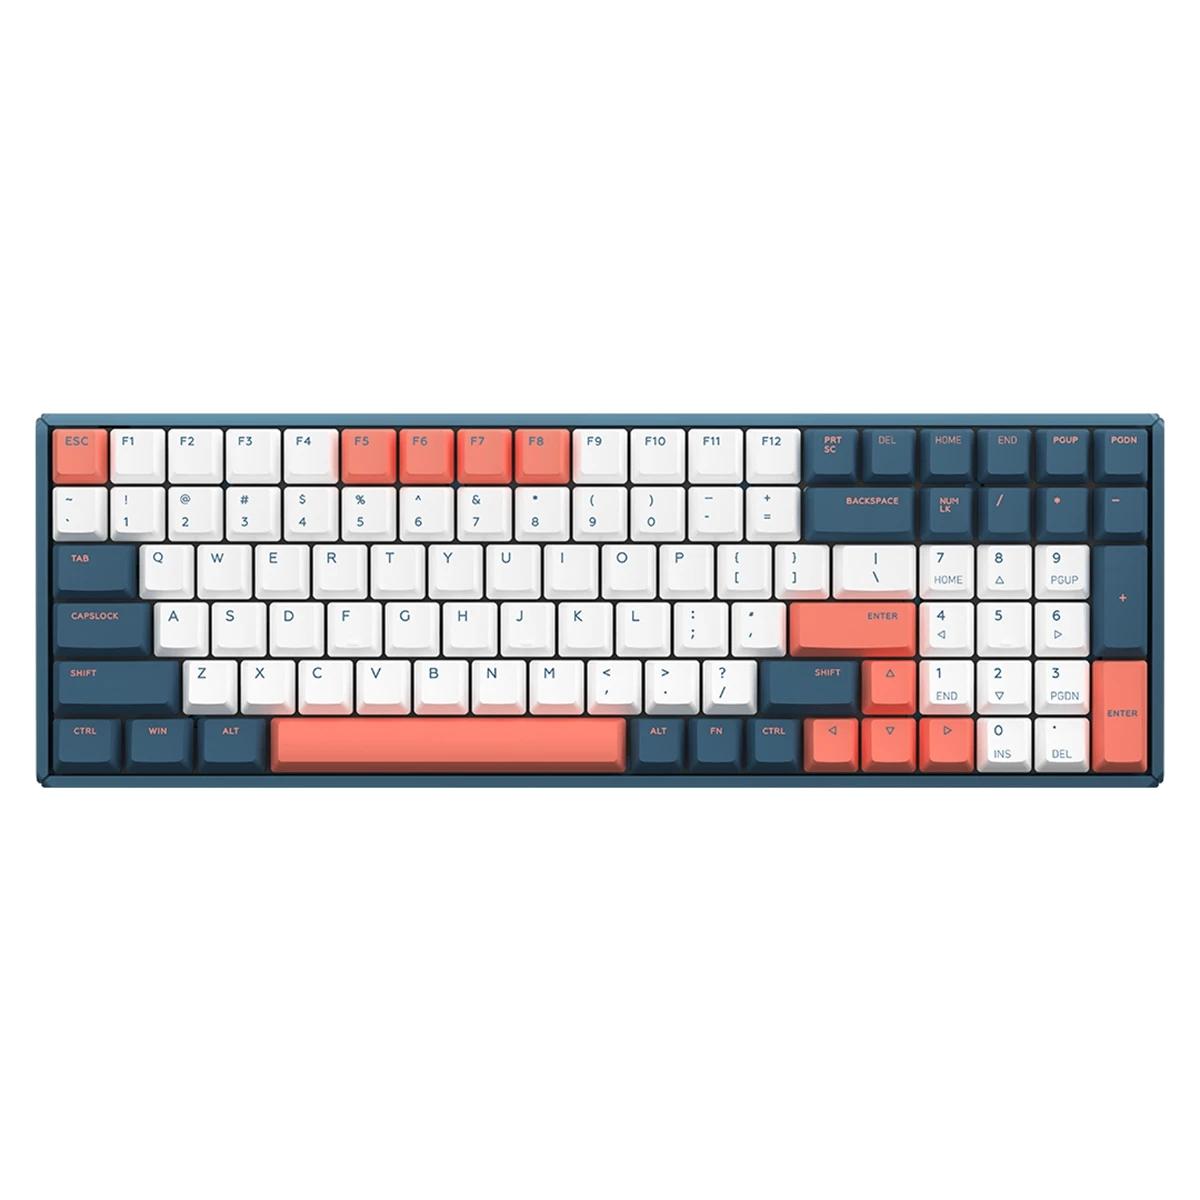 

iQunix F96 Coral Sea 100 Keys 96% Layout NKRO USB Wired Cherry MX Switch PBT Keycaps RGB Mechanical Gaming Keyboard for